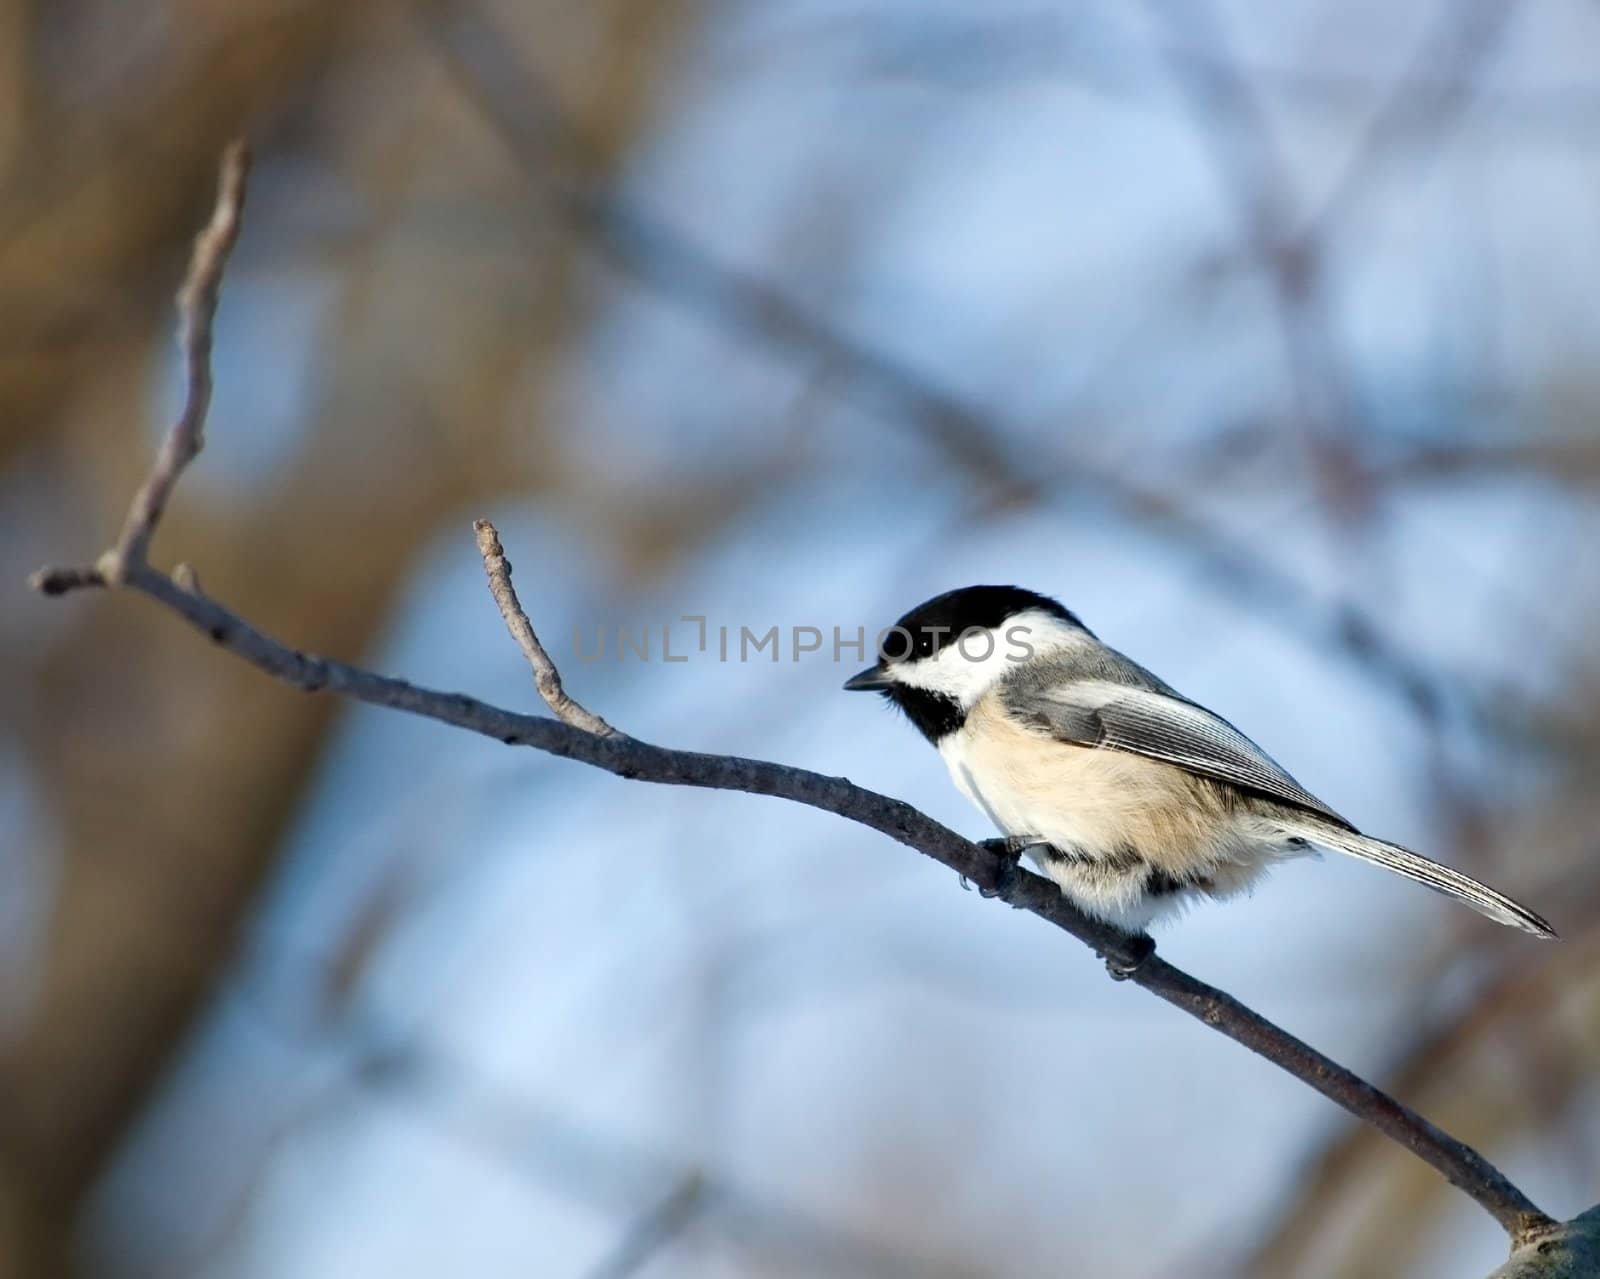 A black-capped chickadee perched on a tree branch.